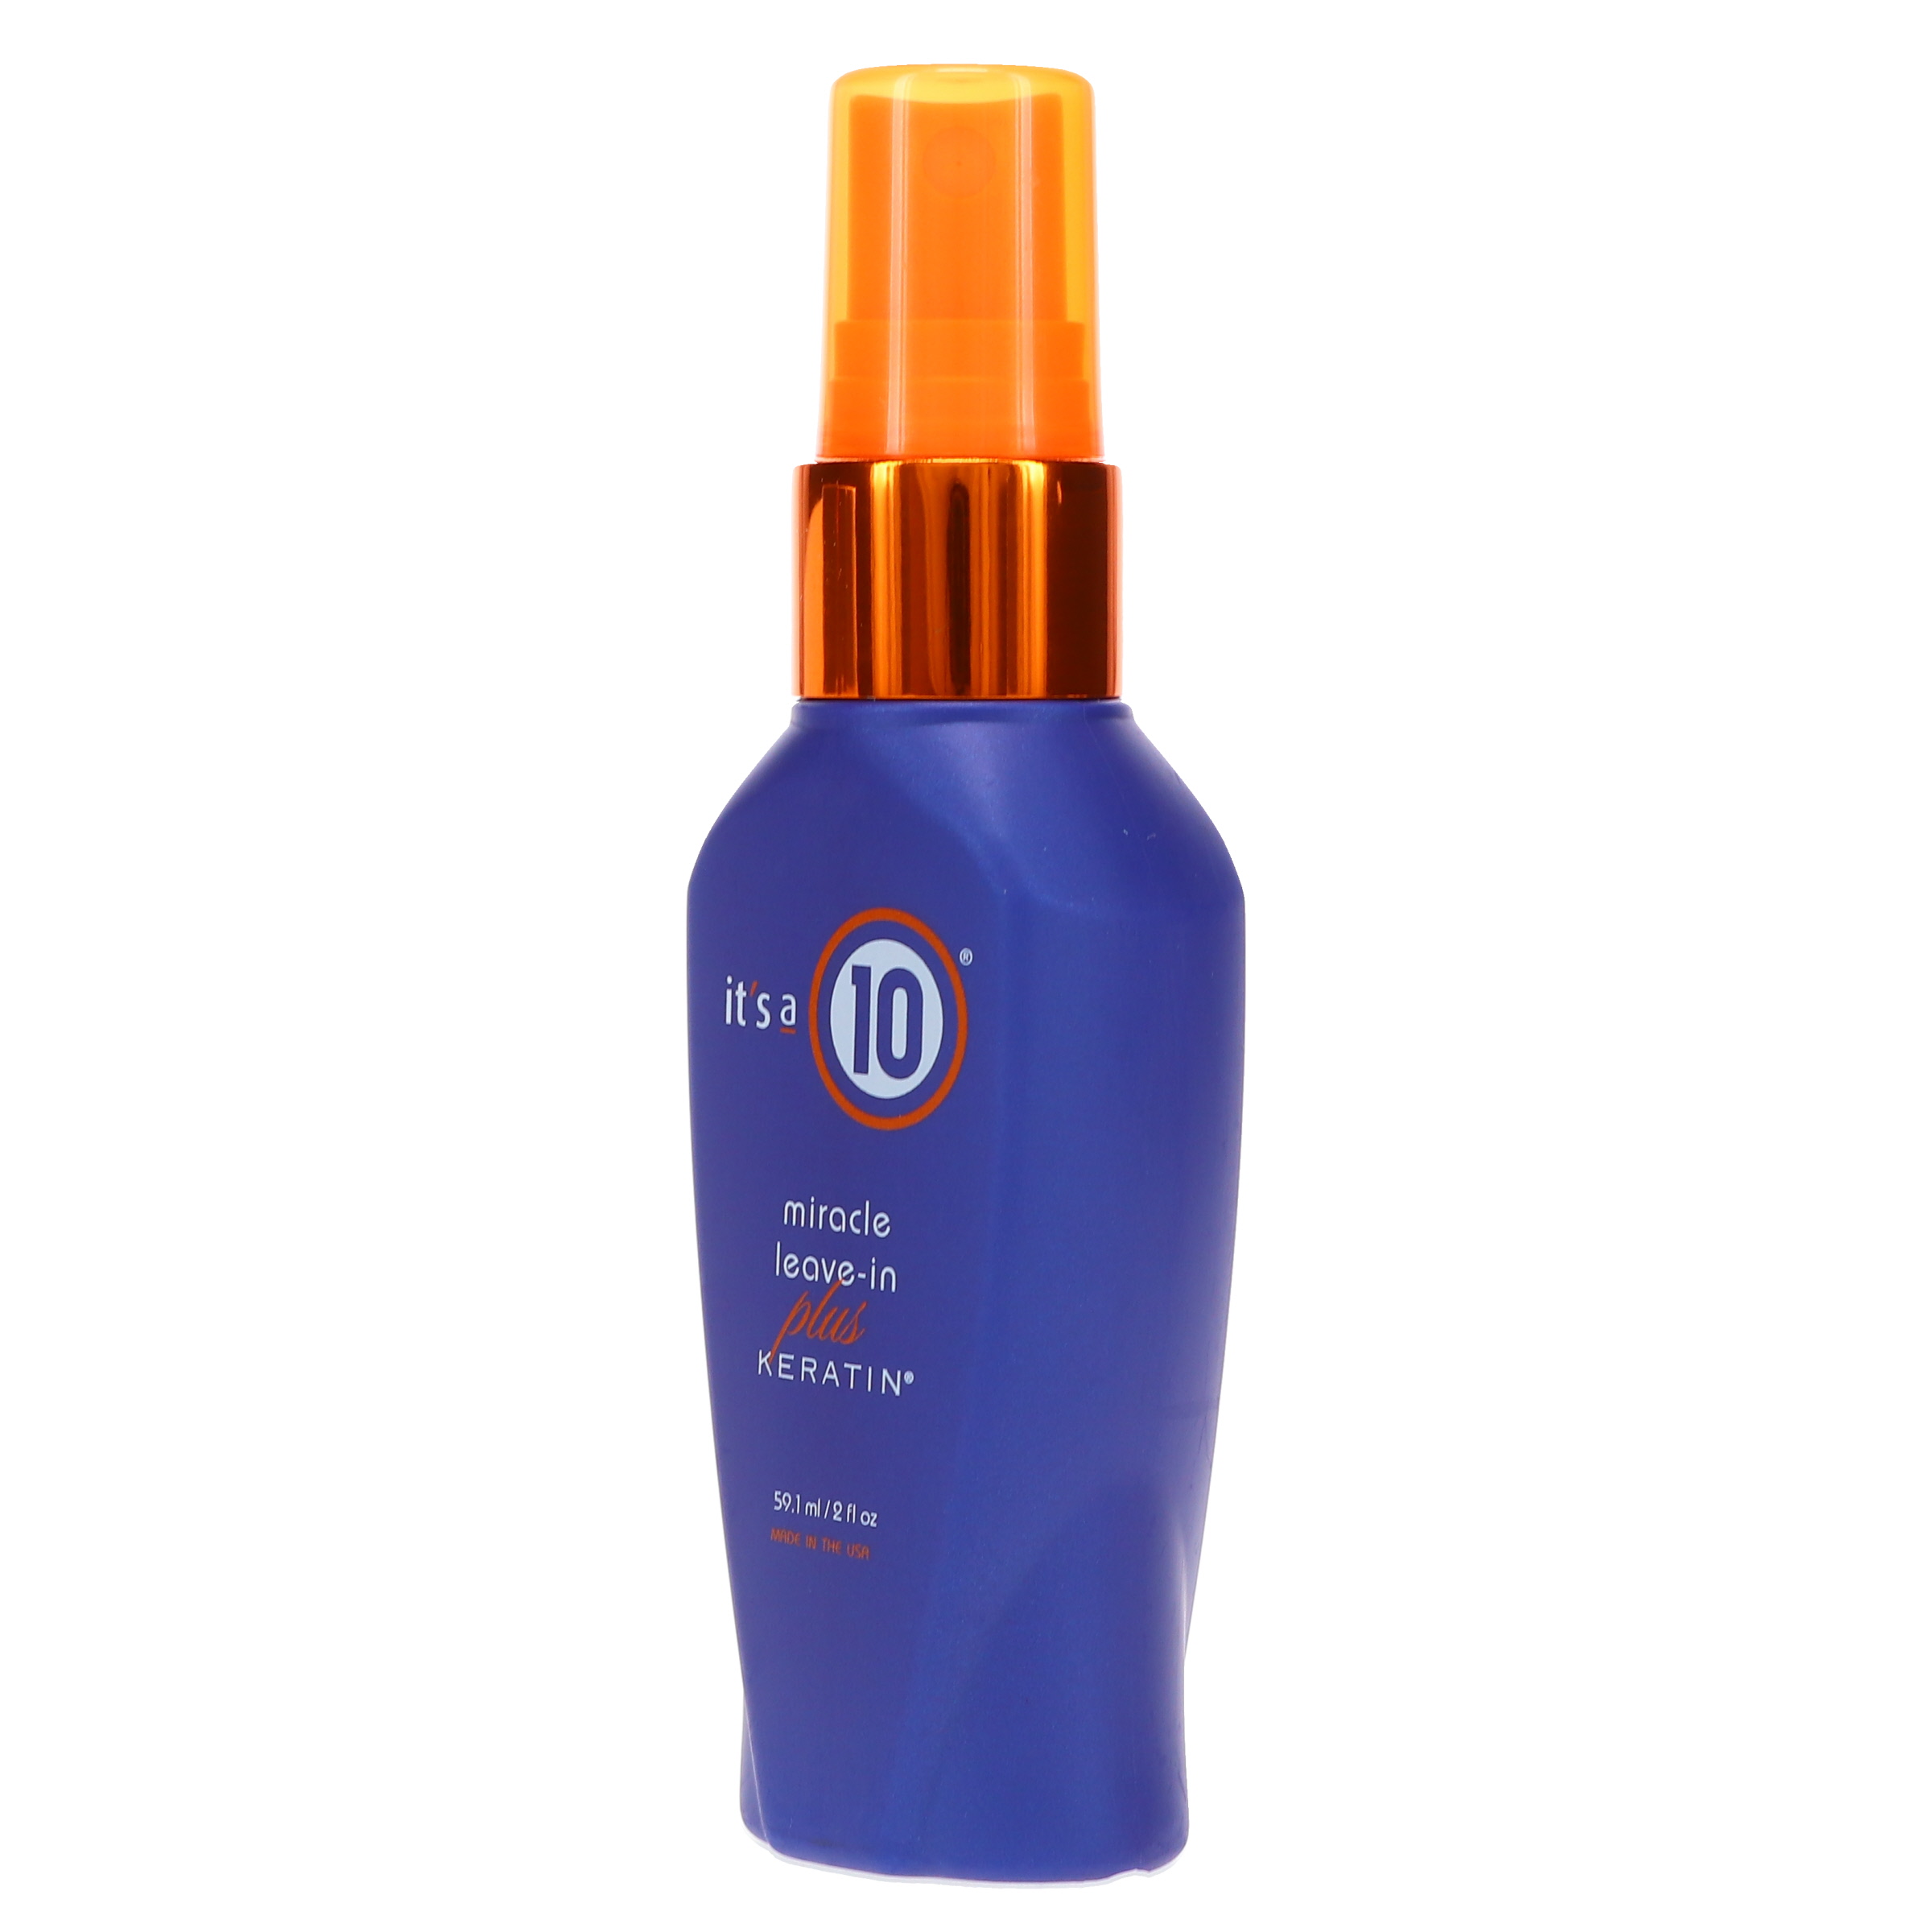 It's A 10 Miracle Leave-In Plus Keratin 2.0oz - image 2 of 2